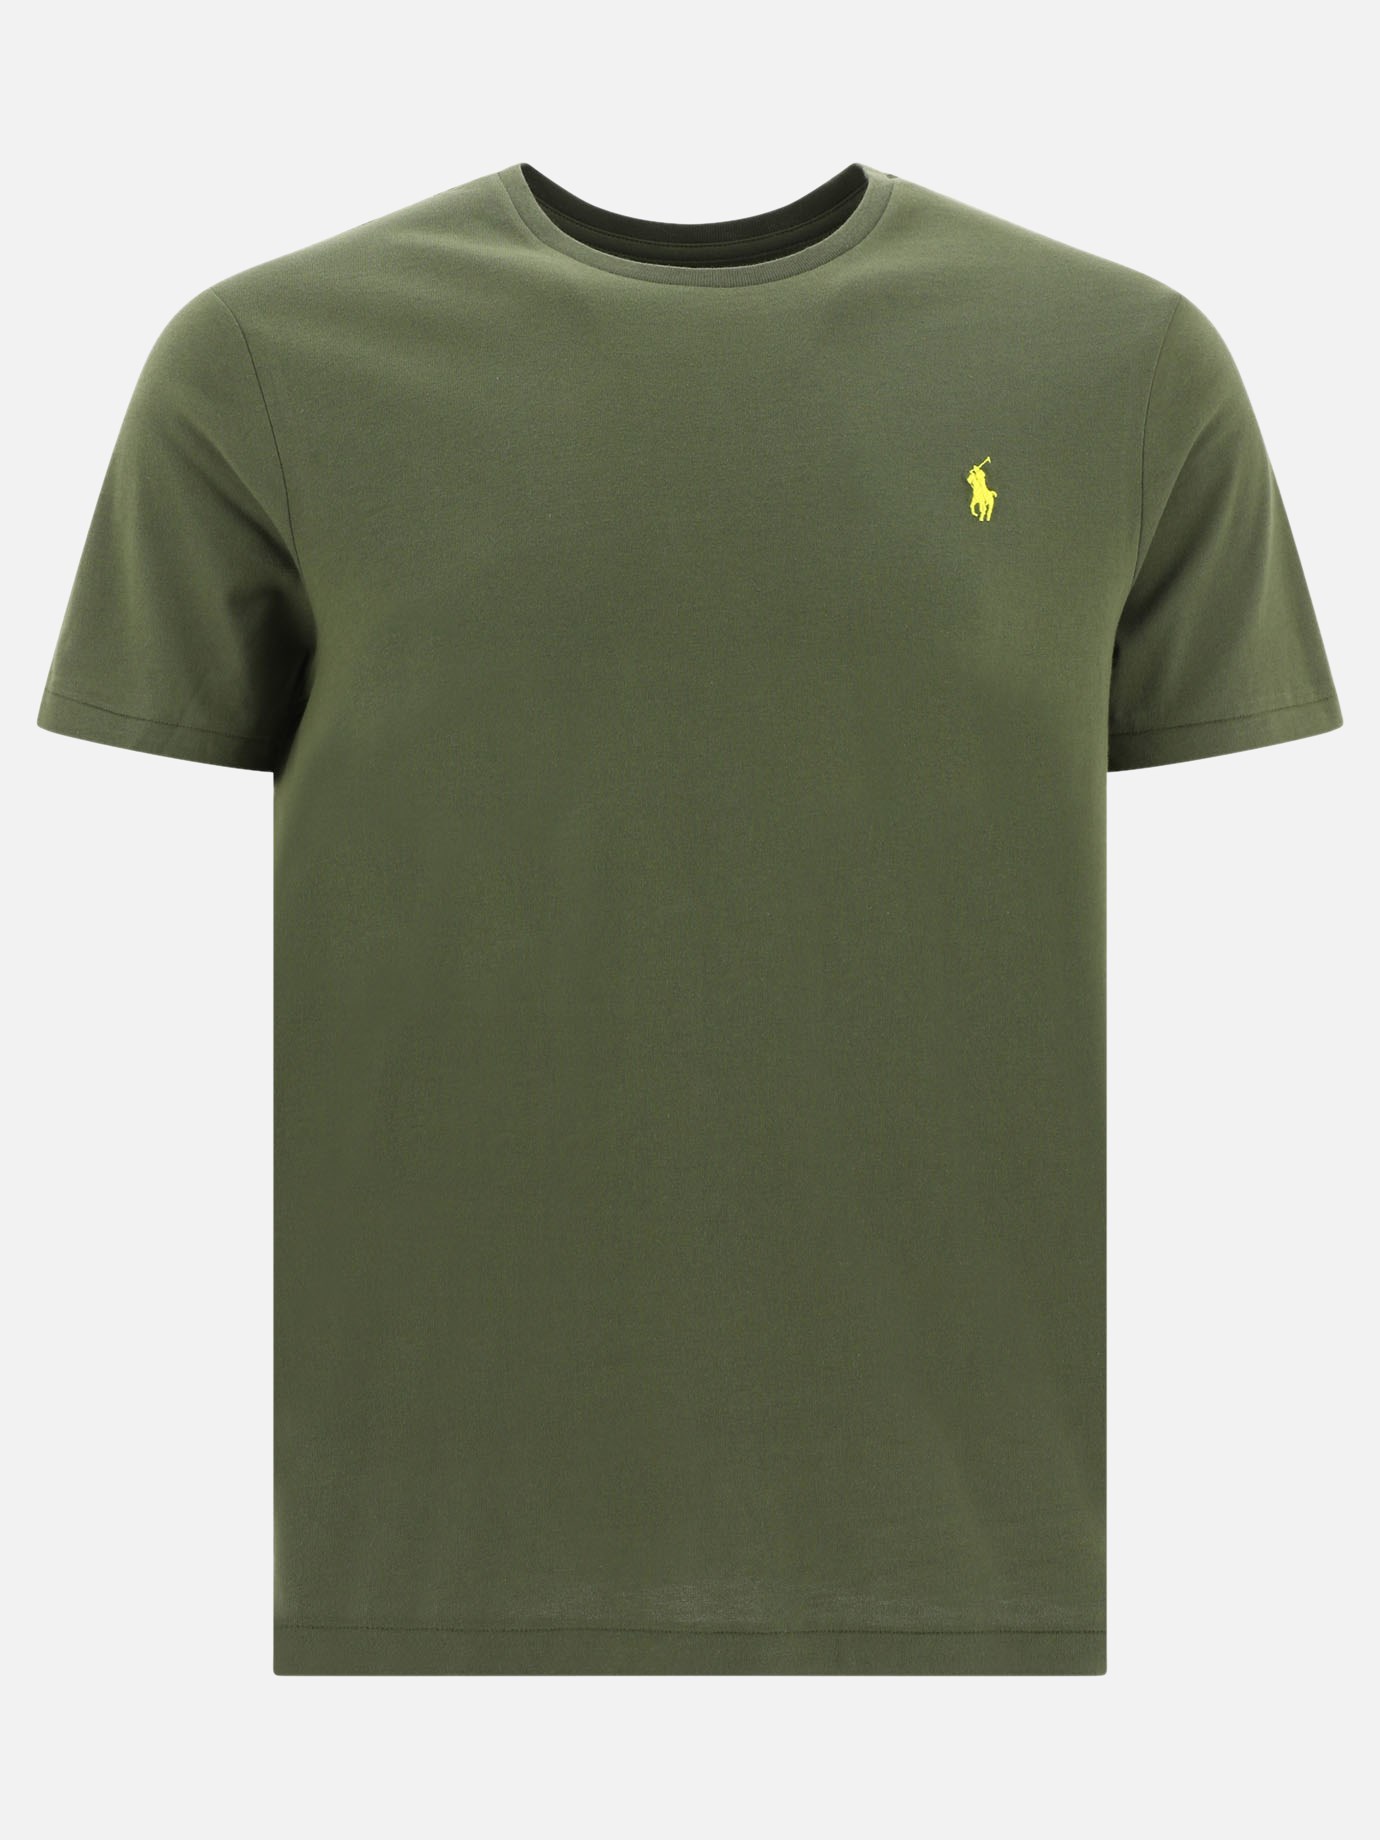 T-shirt  Pony by Polo Ralph Lauren - 1